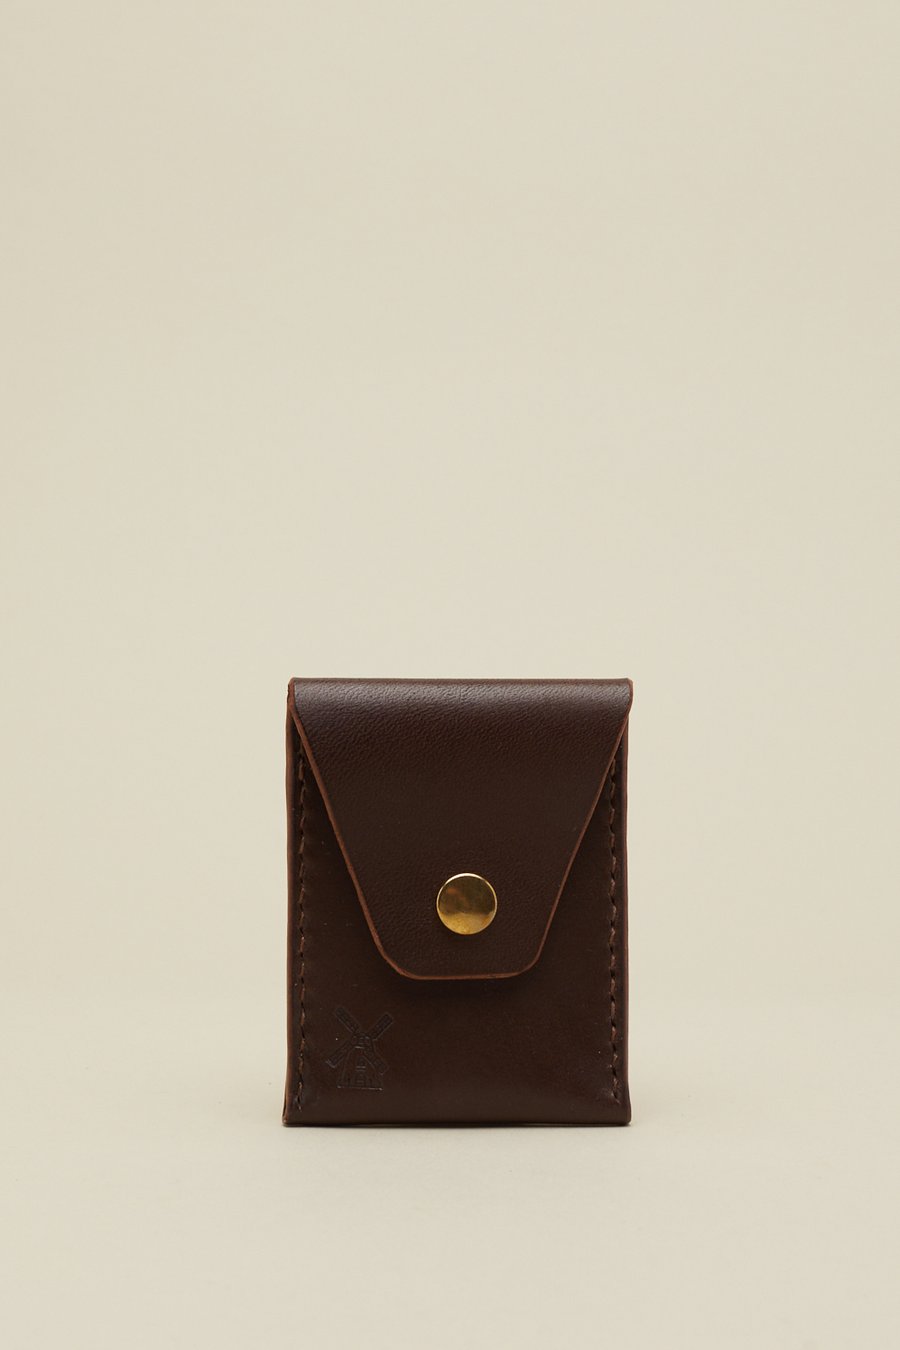 Image of Card Pouch in Walnut